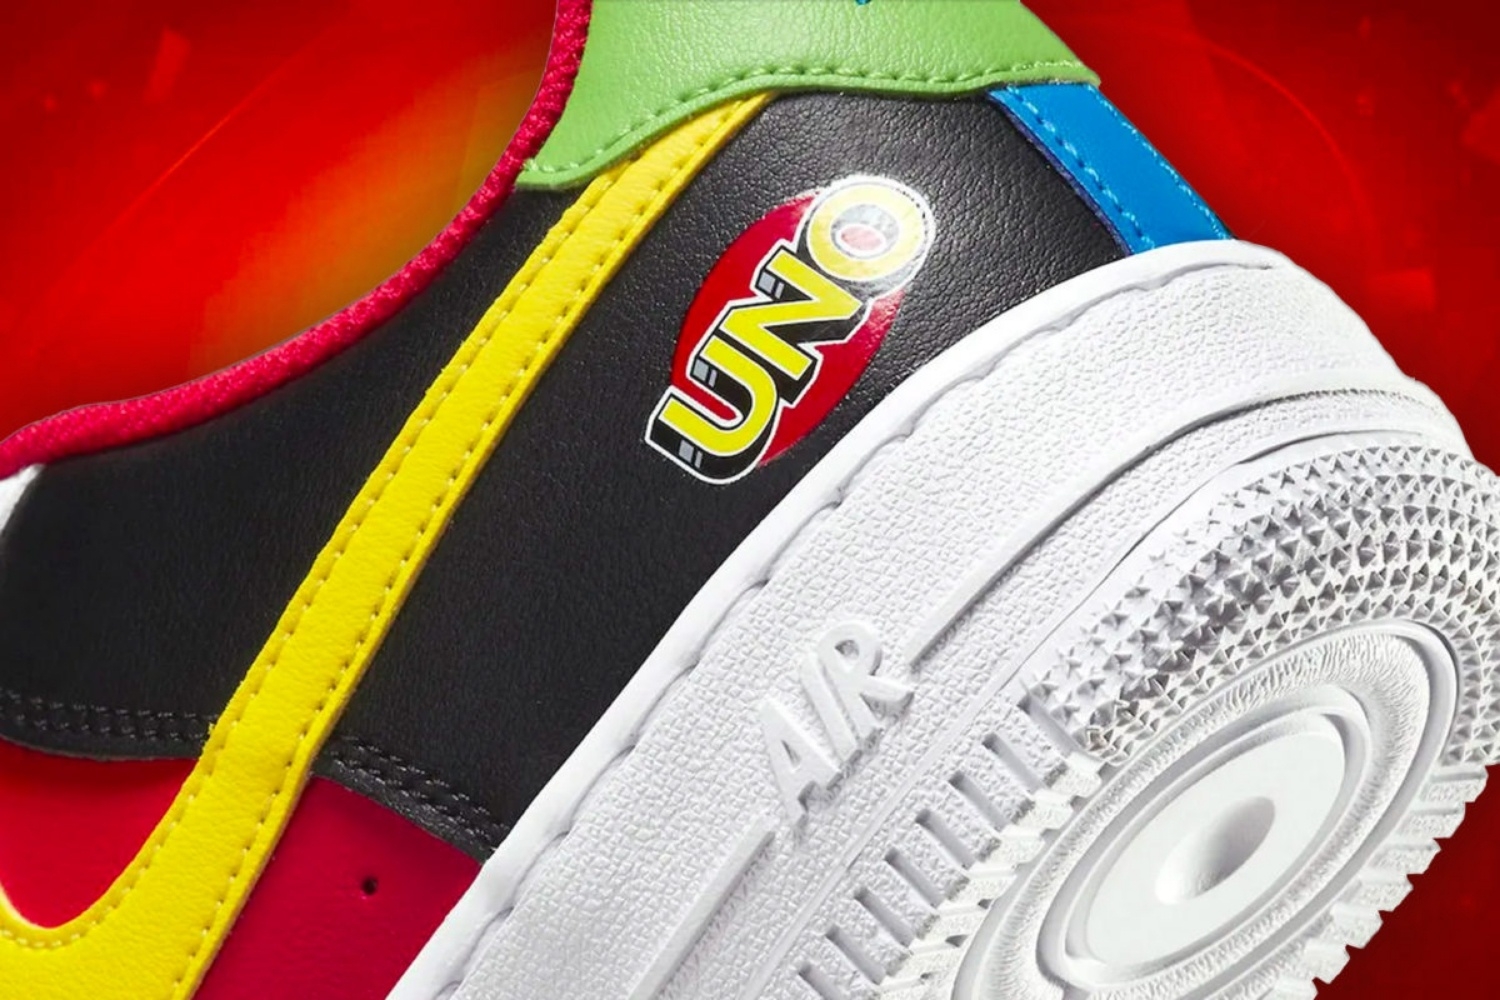 UNO gets its own pair of the Nike Air Force 1 Low